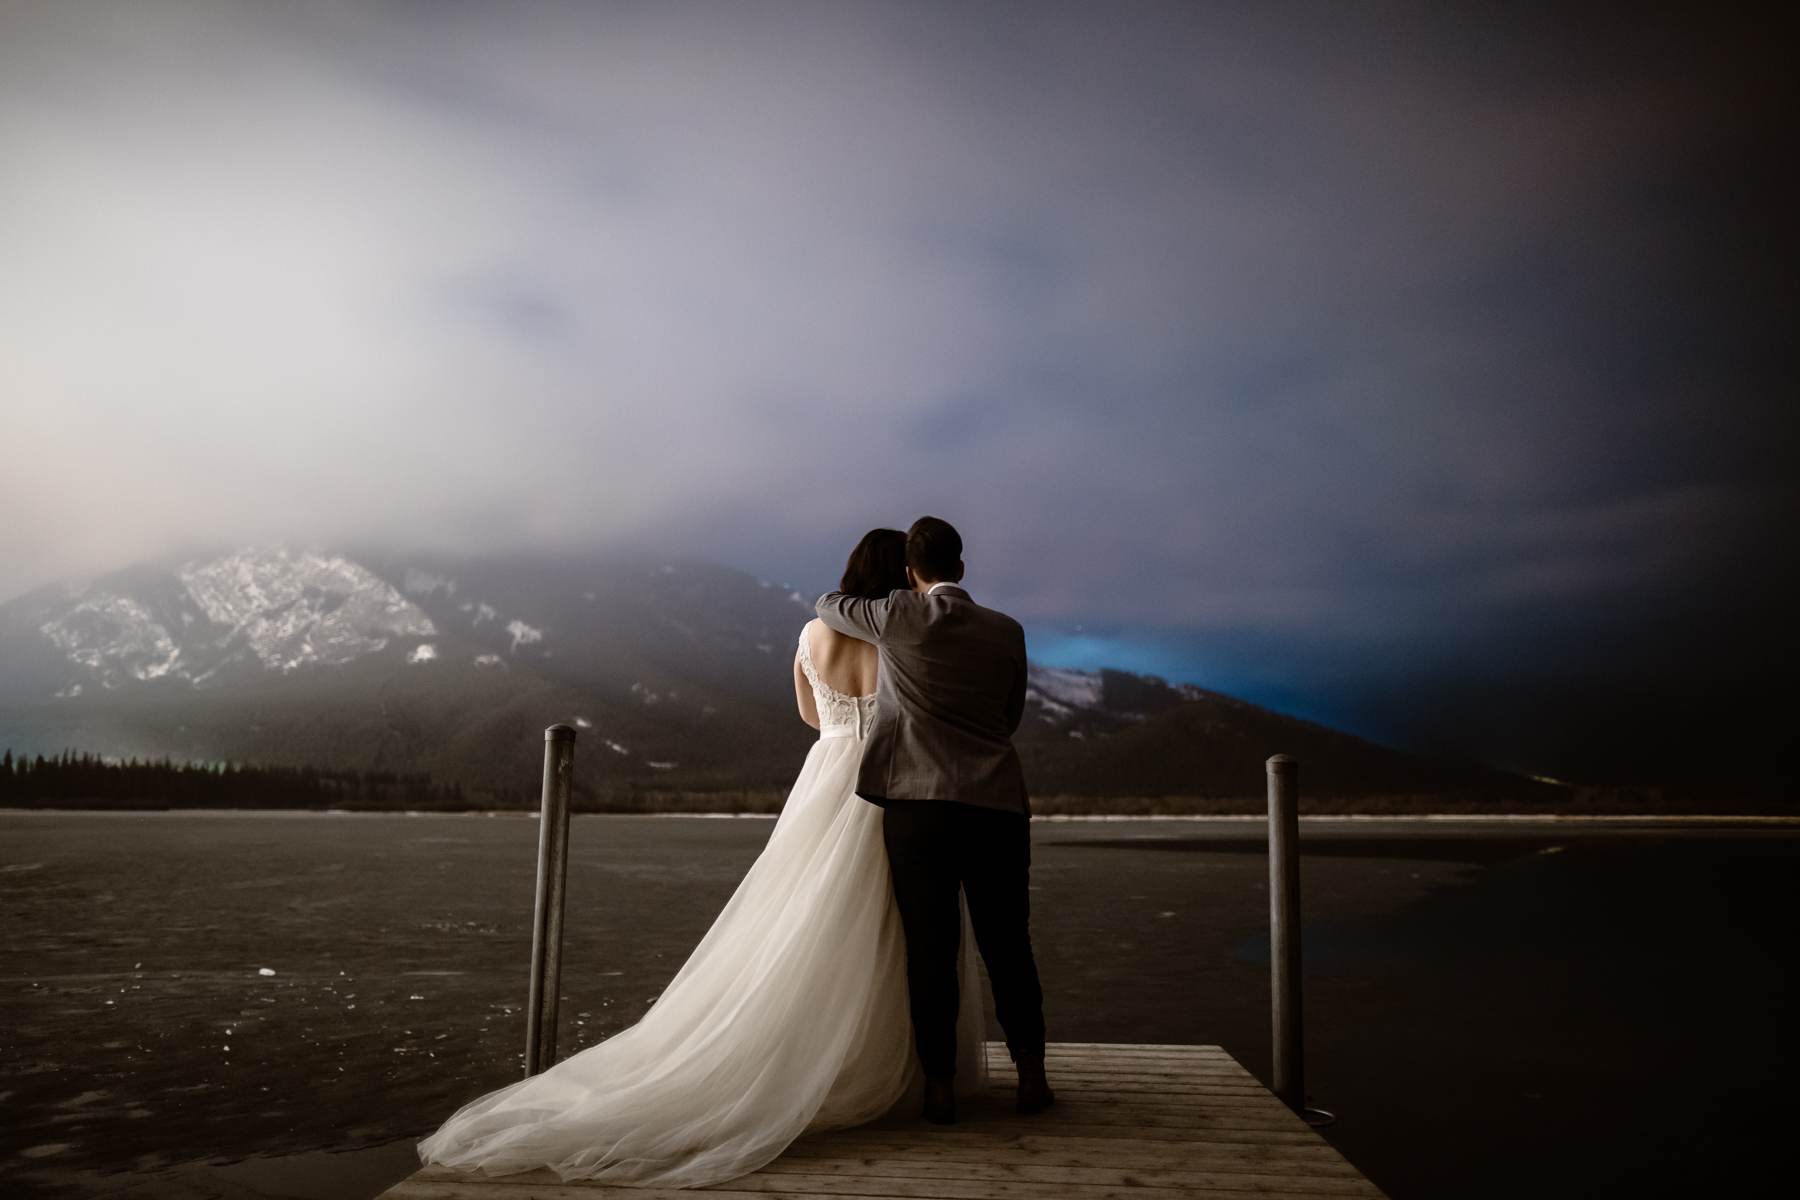 Banff National Park Elopement Photography with LGBTQ-friendly photographers - Image 39